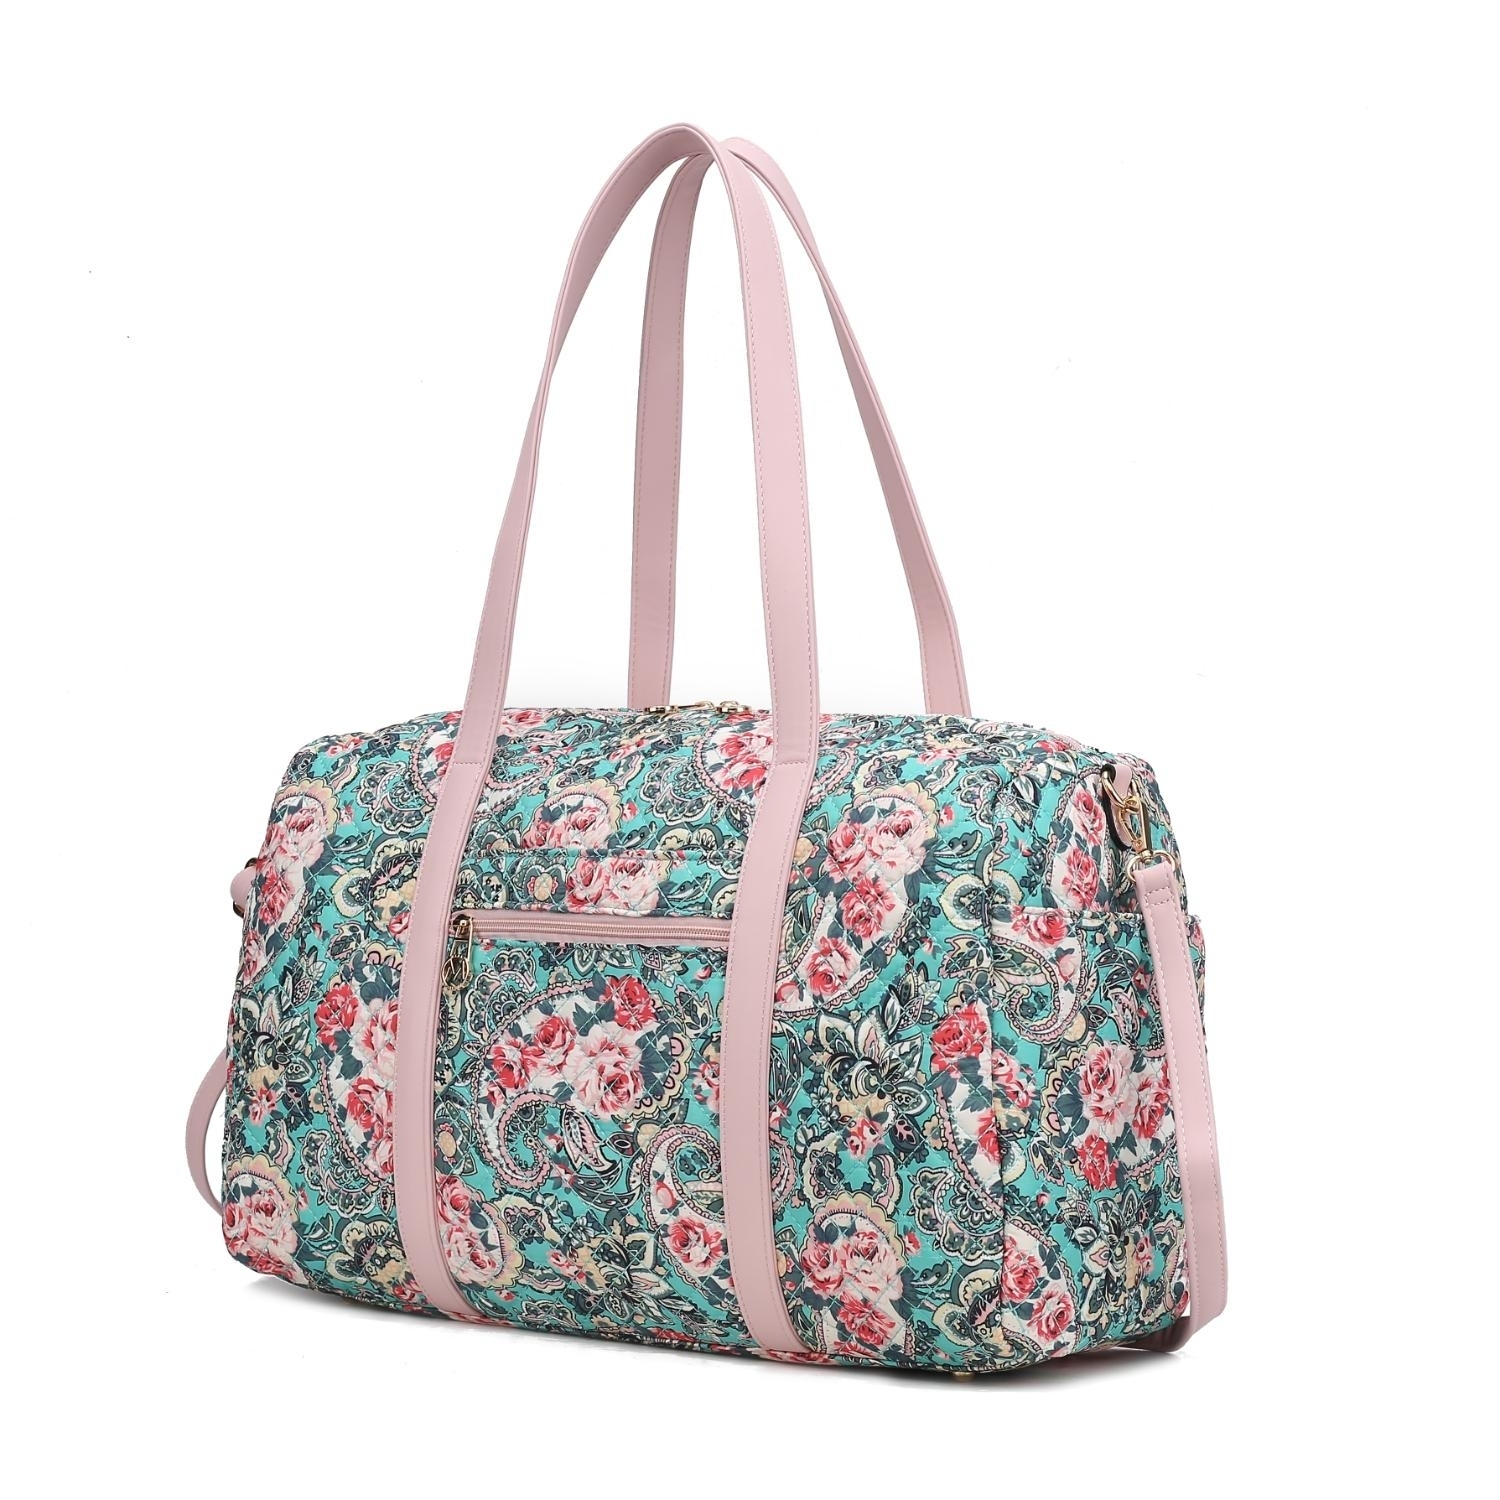 MKF Collection Khelani Quilted Cotton Botanical Pattern Women's Duffle Bag By Mia K - Green